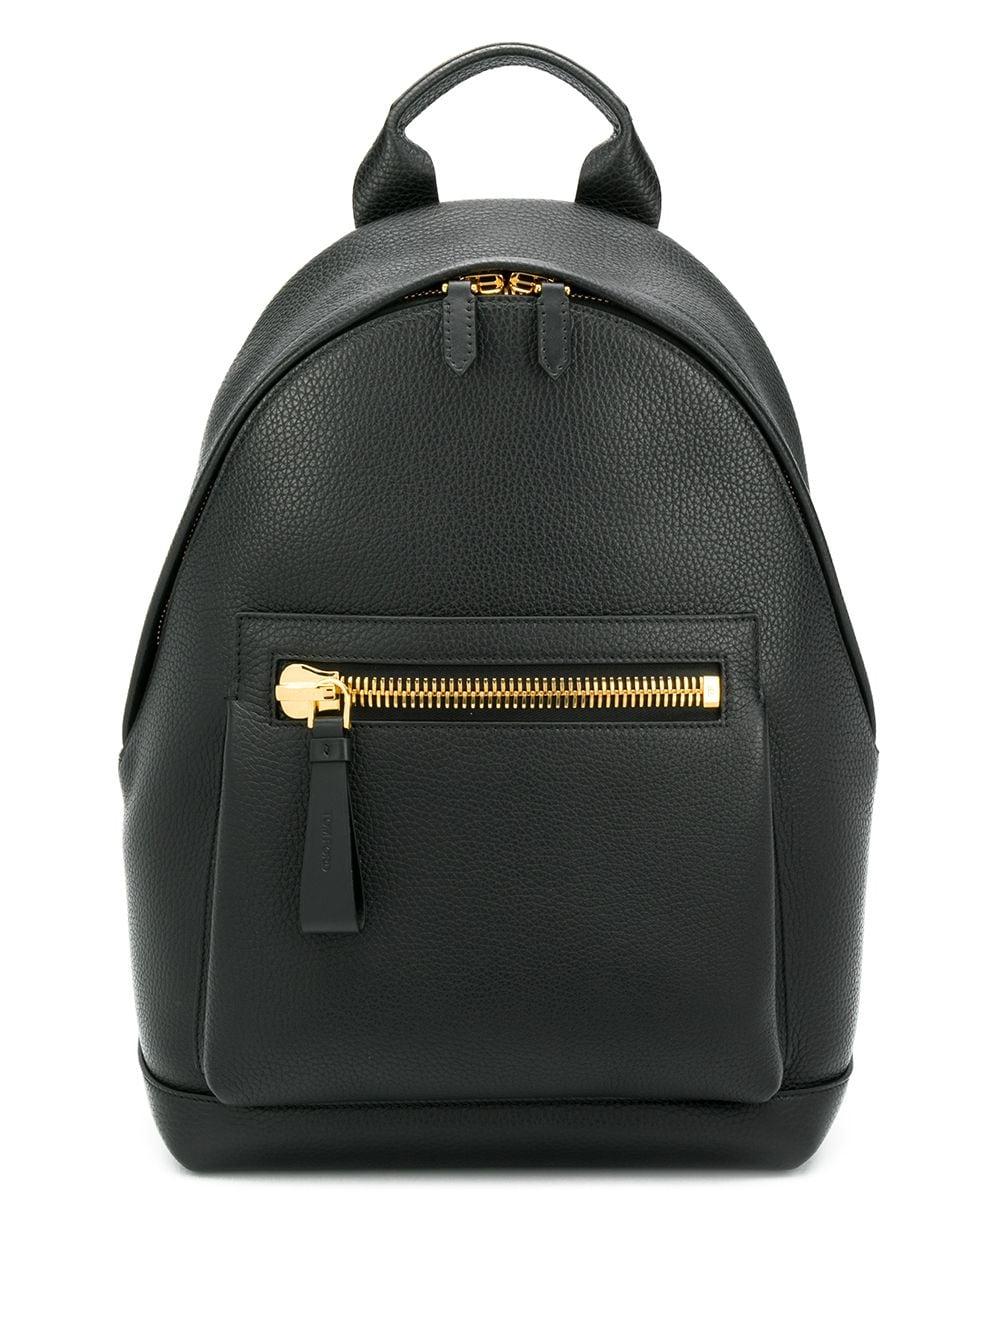 Tom Ford Leather Classic Zipped Backpack in Black for Men - Save 23% - Lyst